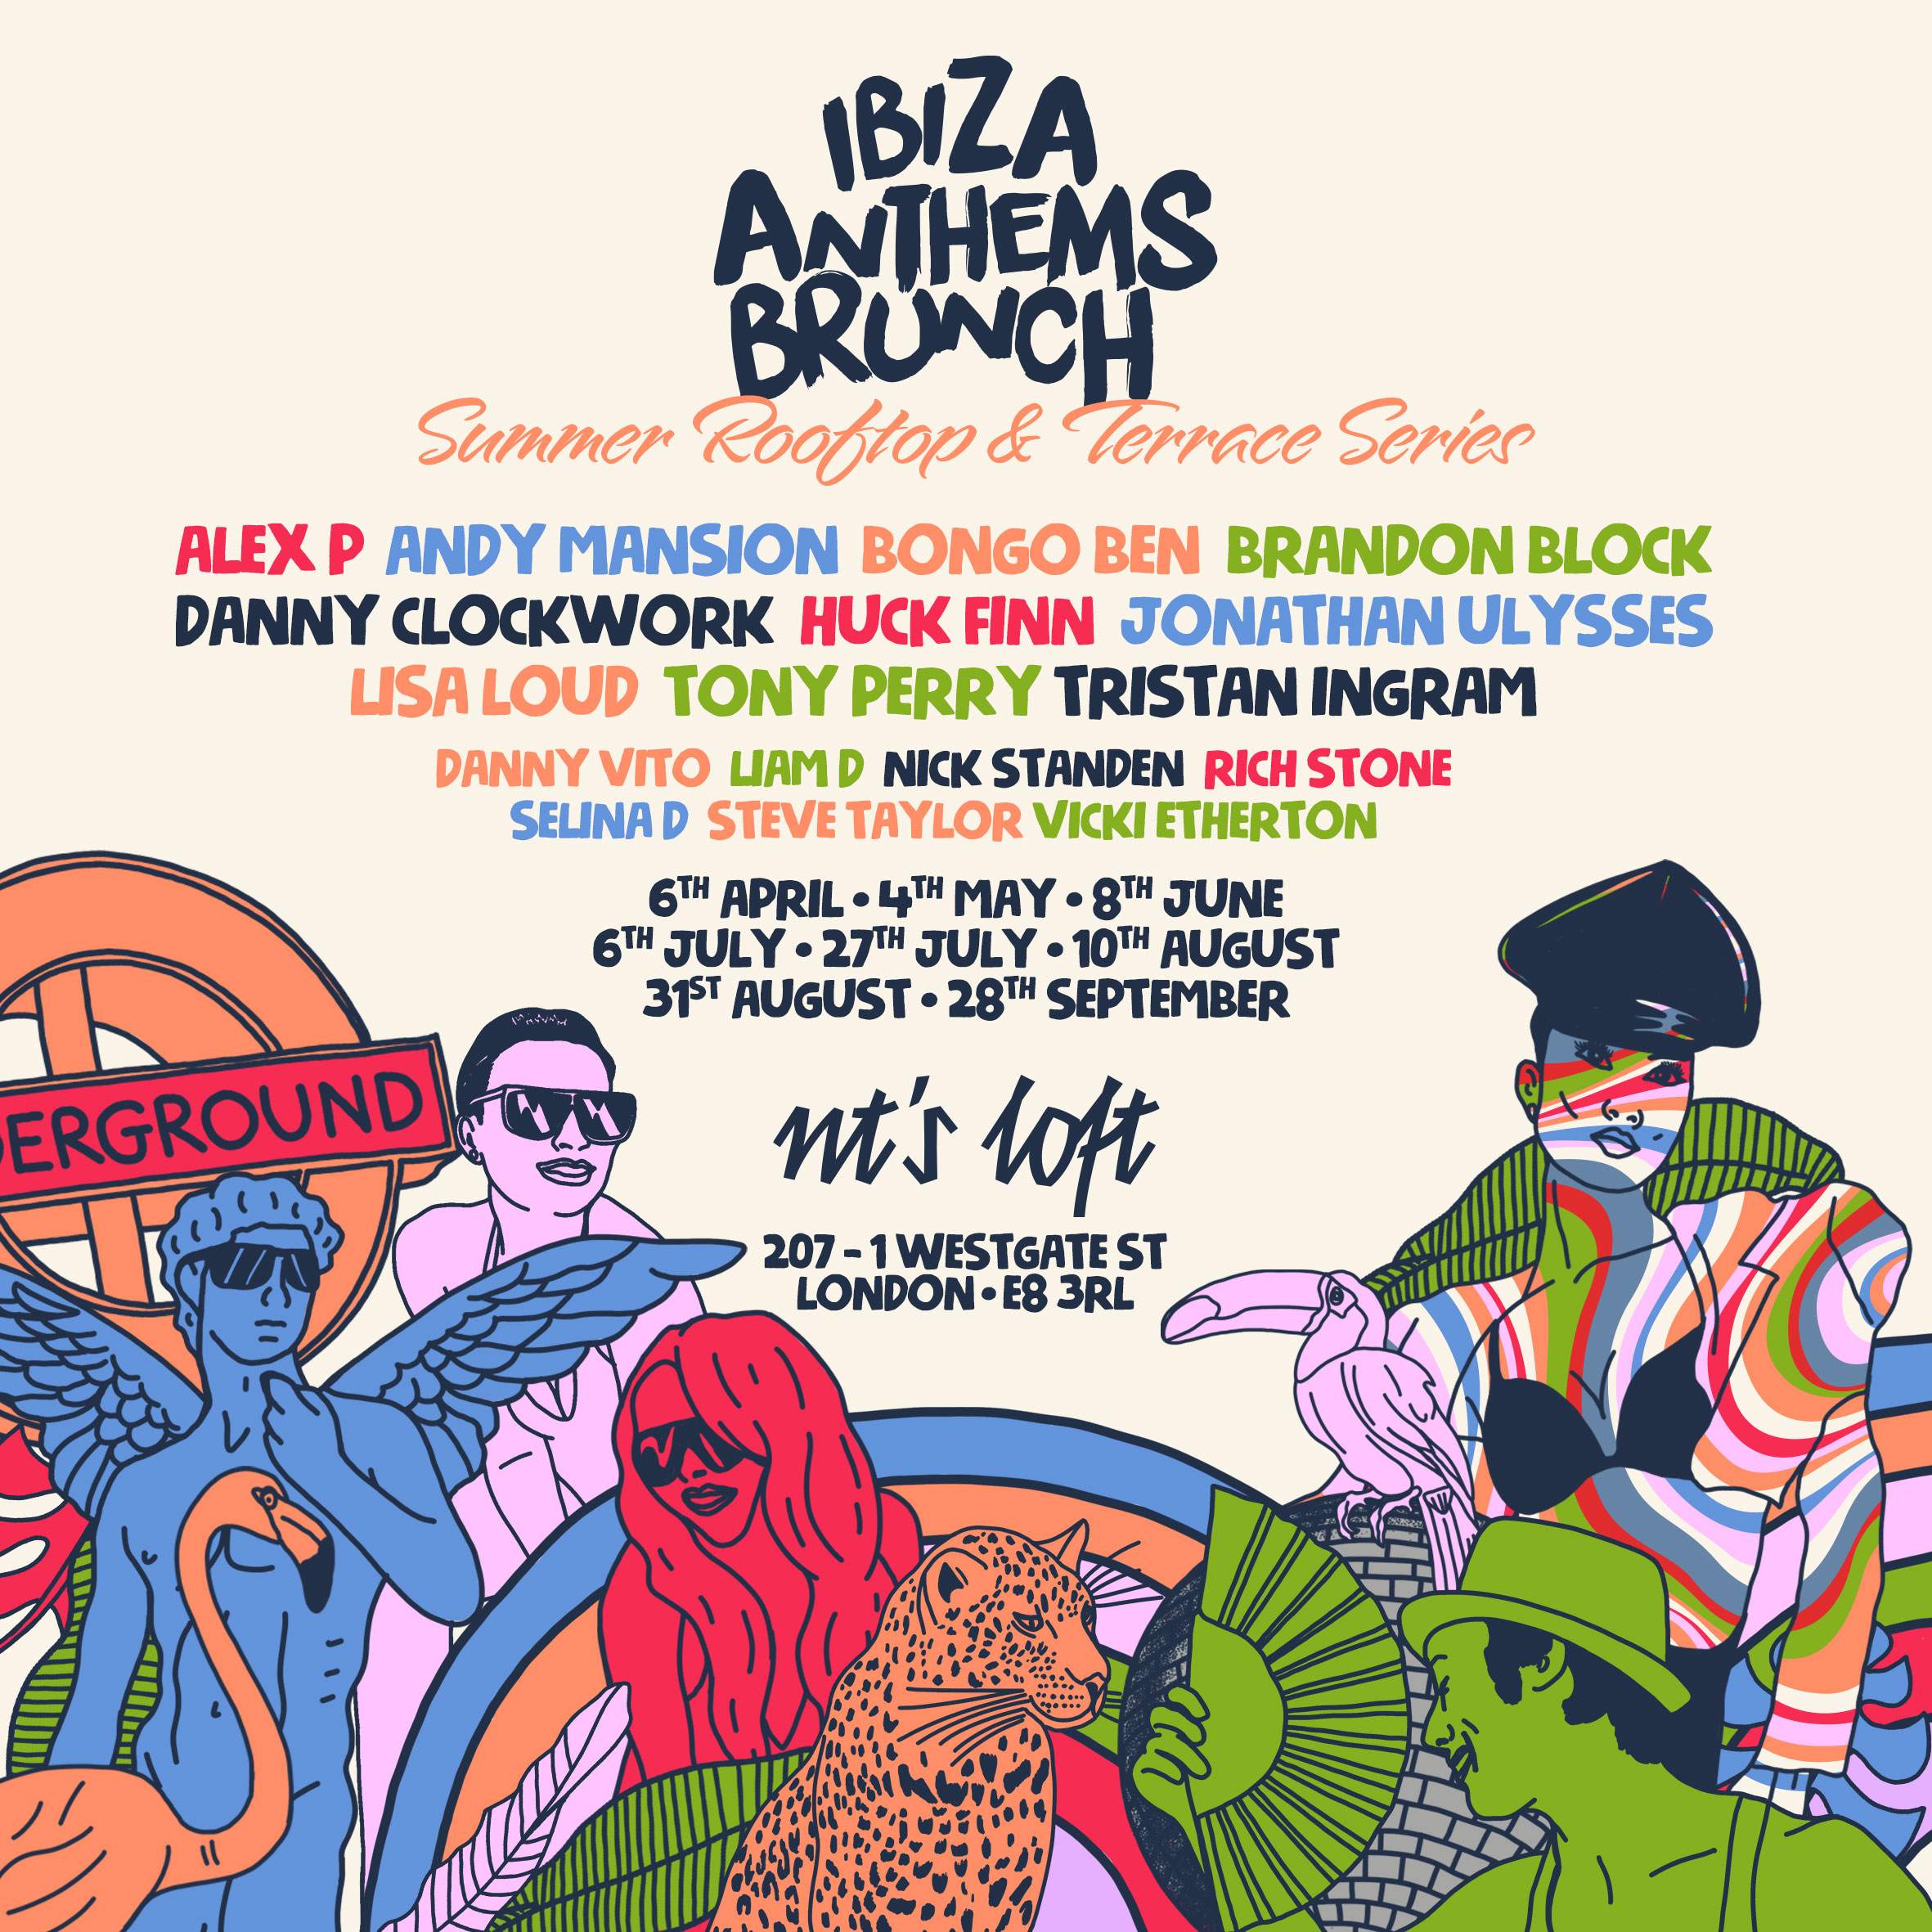 Ibiza Anthems Brunch Bank Holiday Rooftop Party - フライヤー表